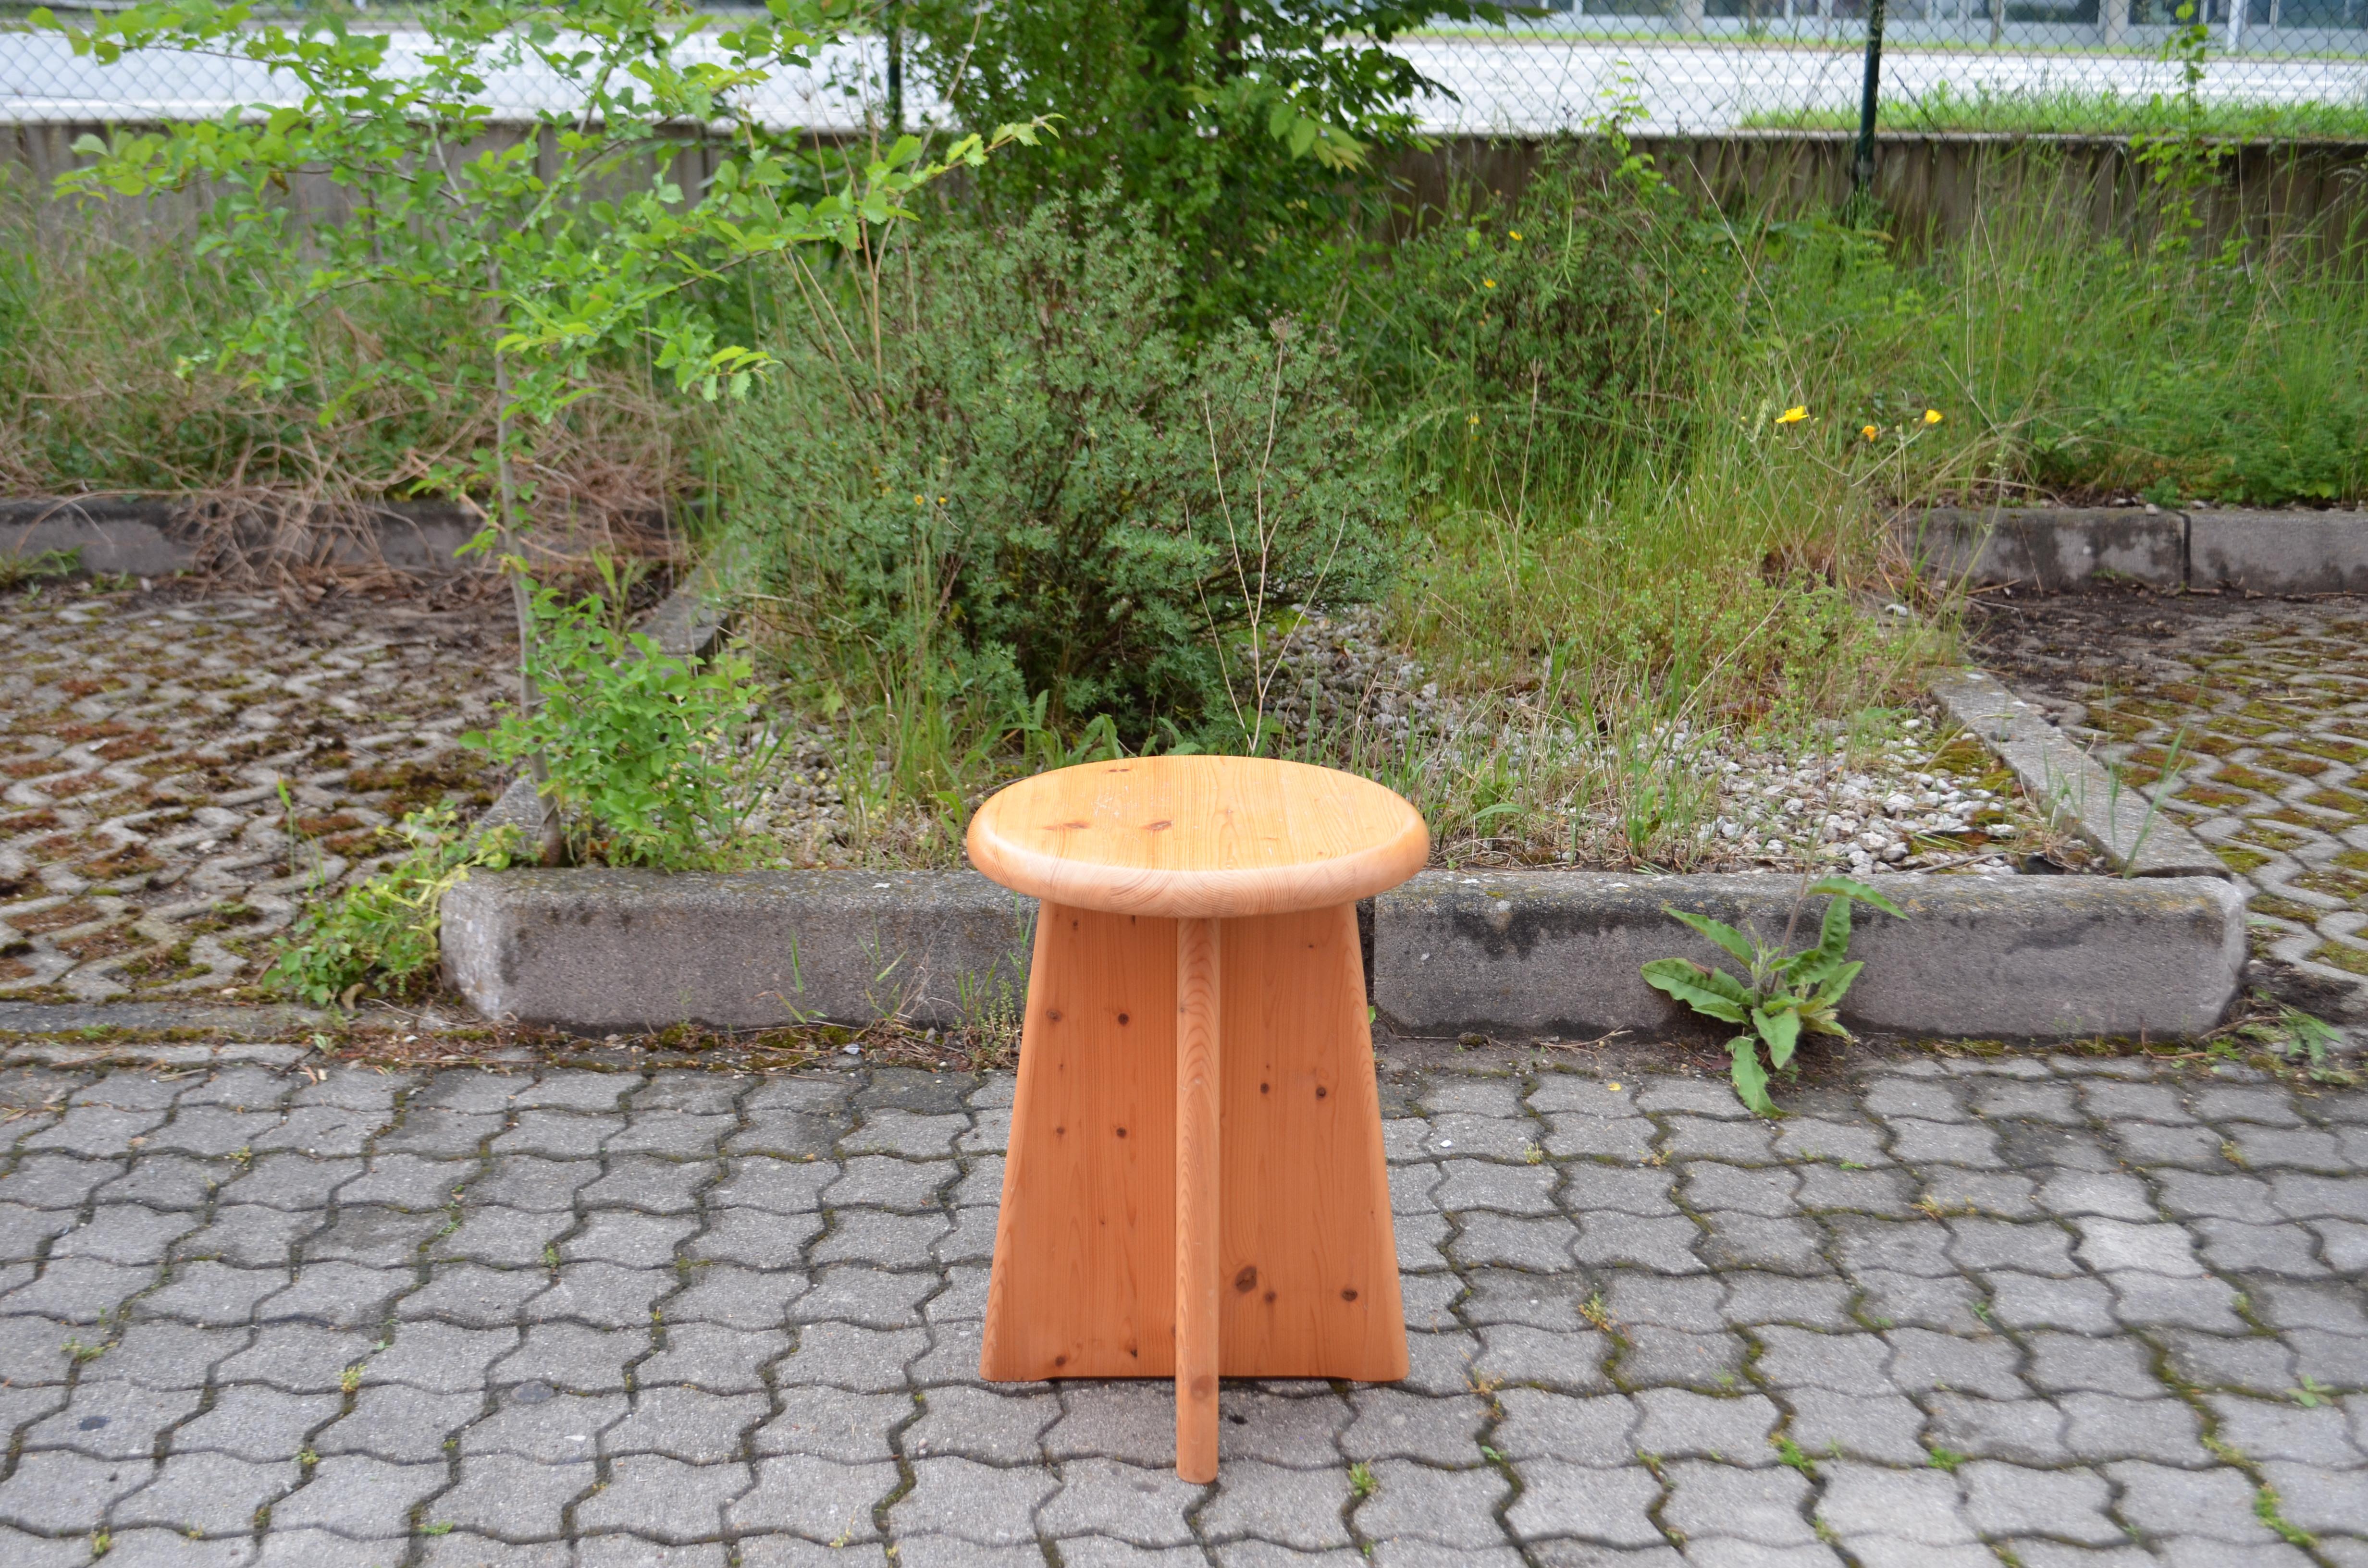 This Stool comes from Denmark.
It has a minimalistic and architectural design.
Puristic and beautiful.
Made of solid scandinavian pine wood.
We have 6 stools in Stock.